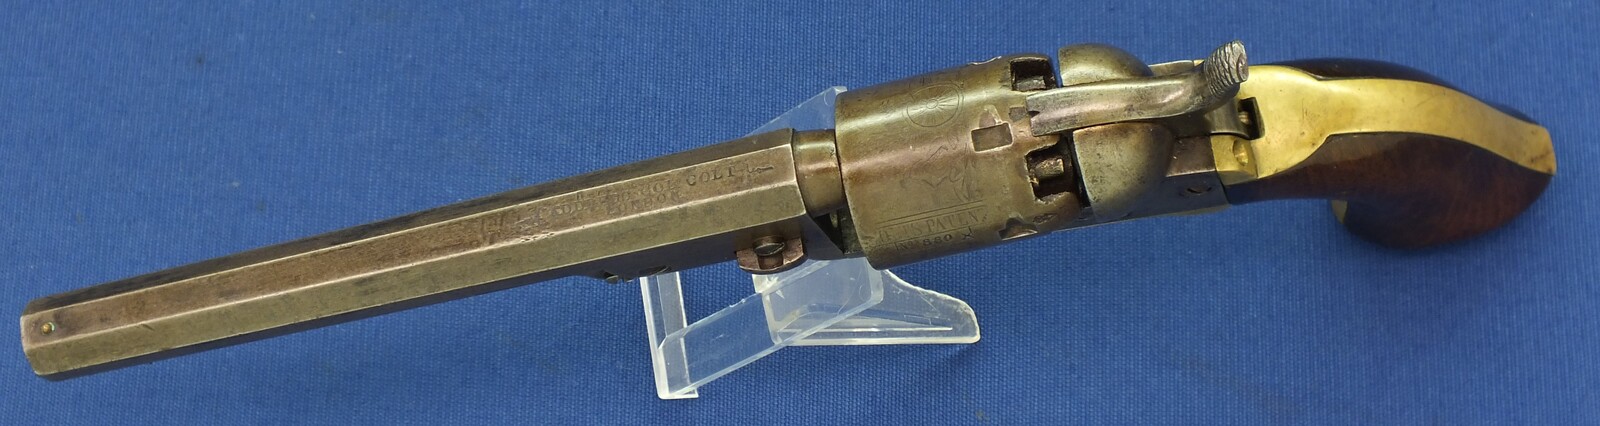 A rare antique English Colt Model 1849 London Pocket X percussion revolver. 5 shot, 31 caliber. 6 inch barrel with 2 line London address. Length 29,5cm. In very good condition. 